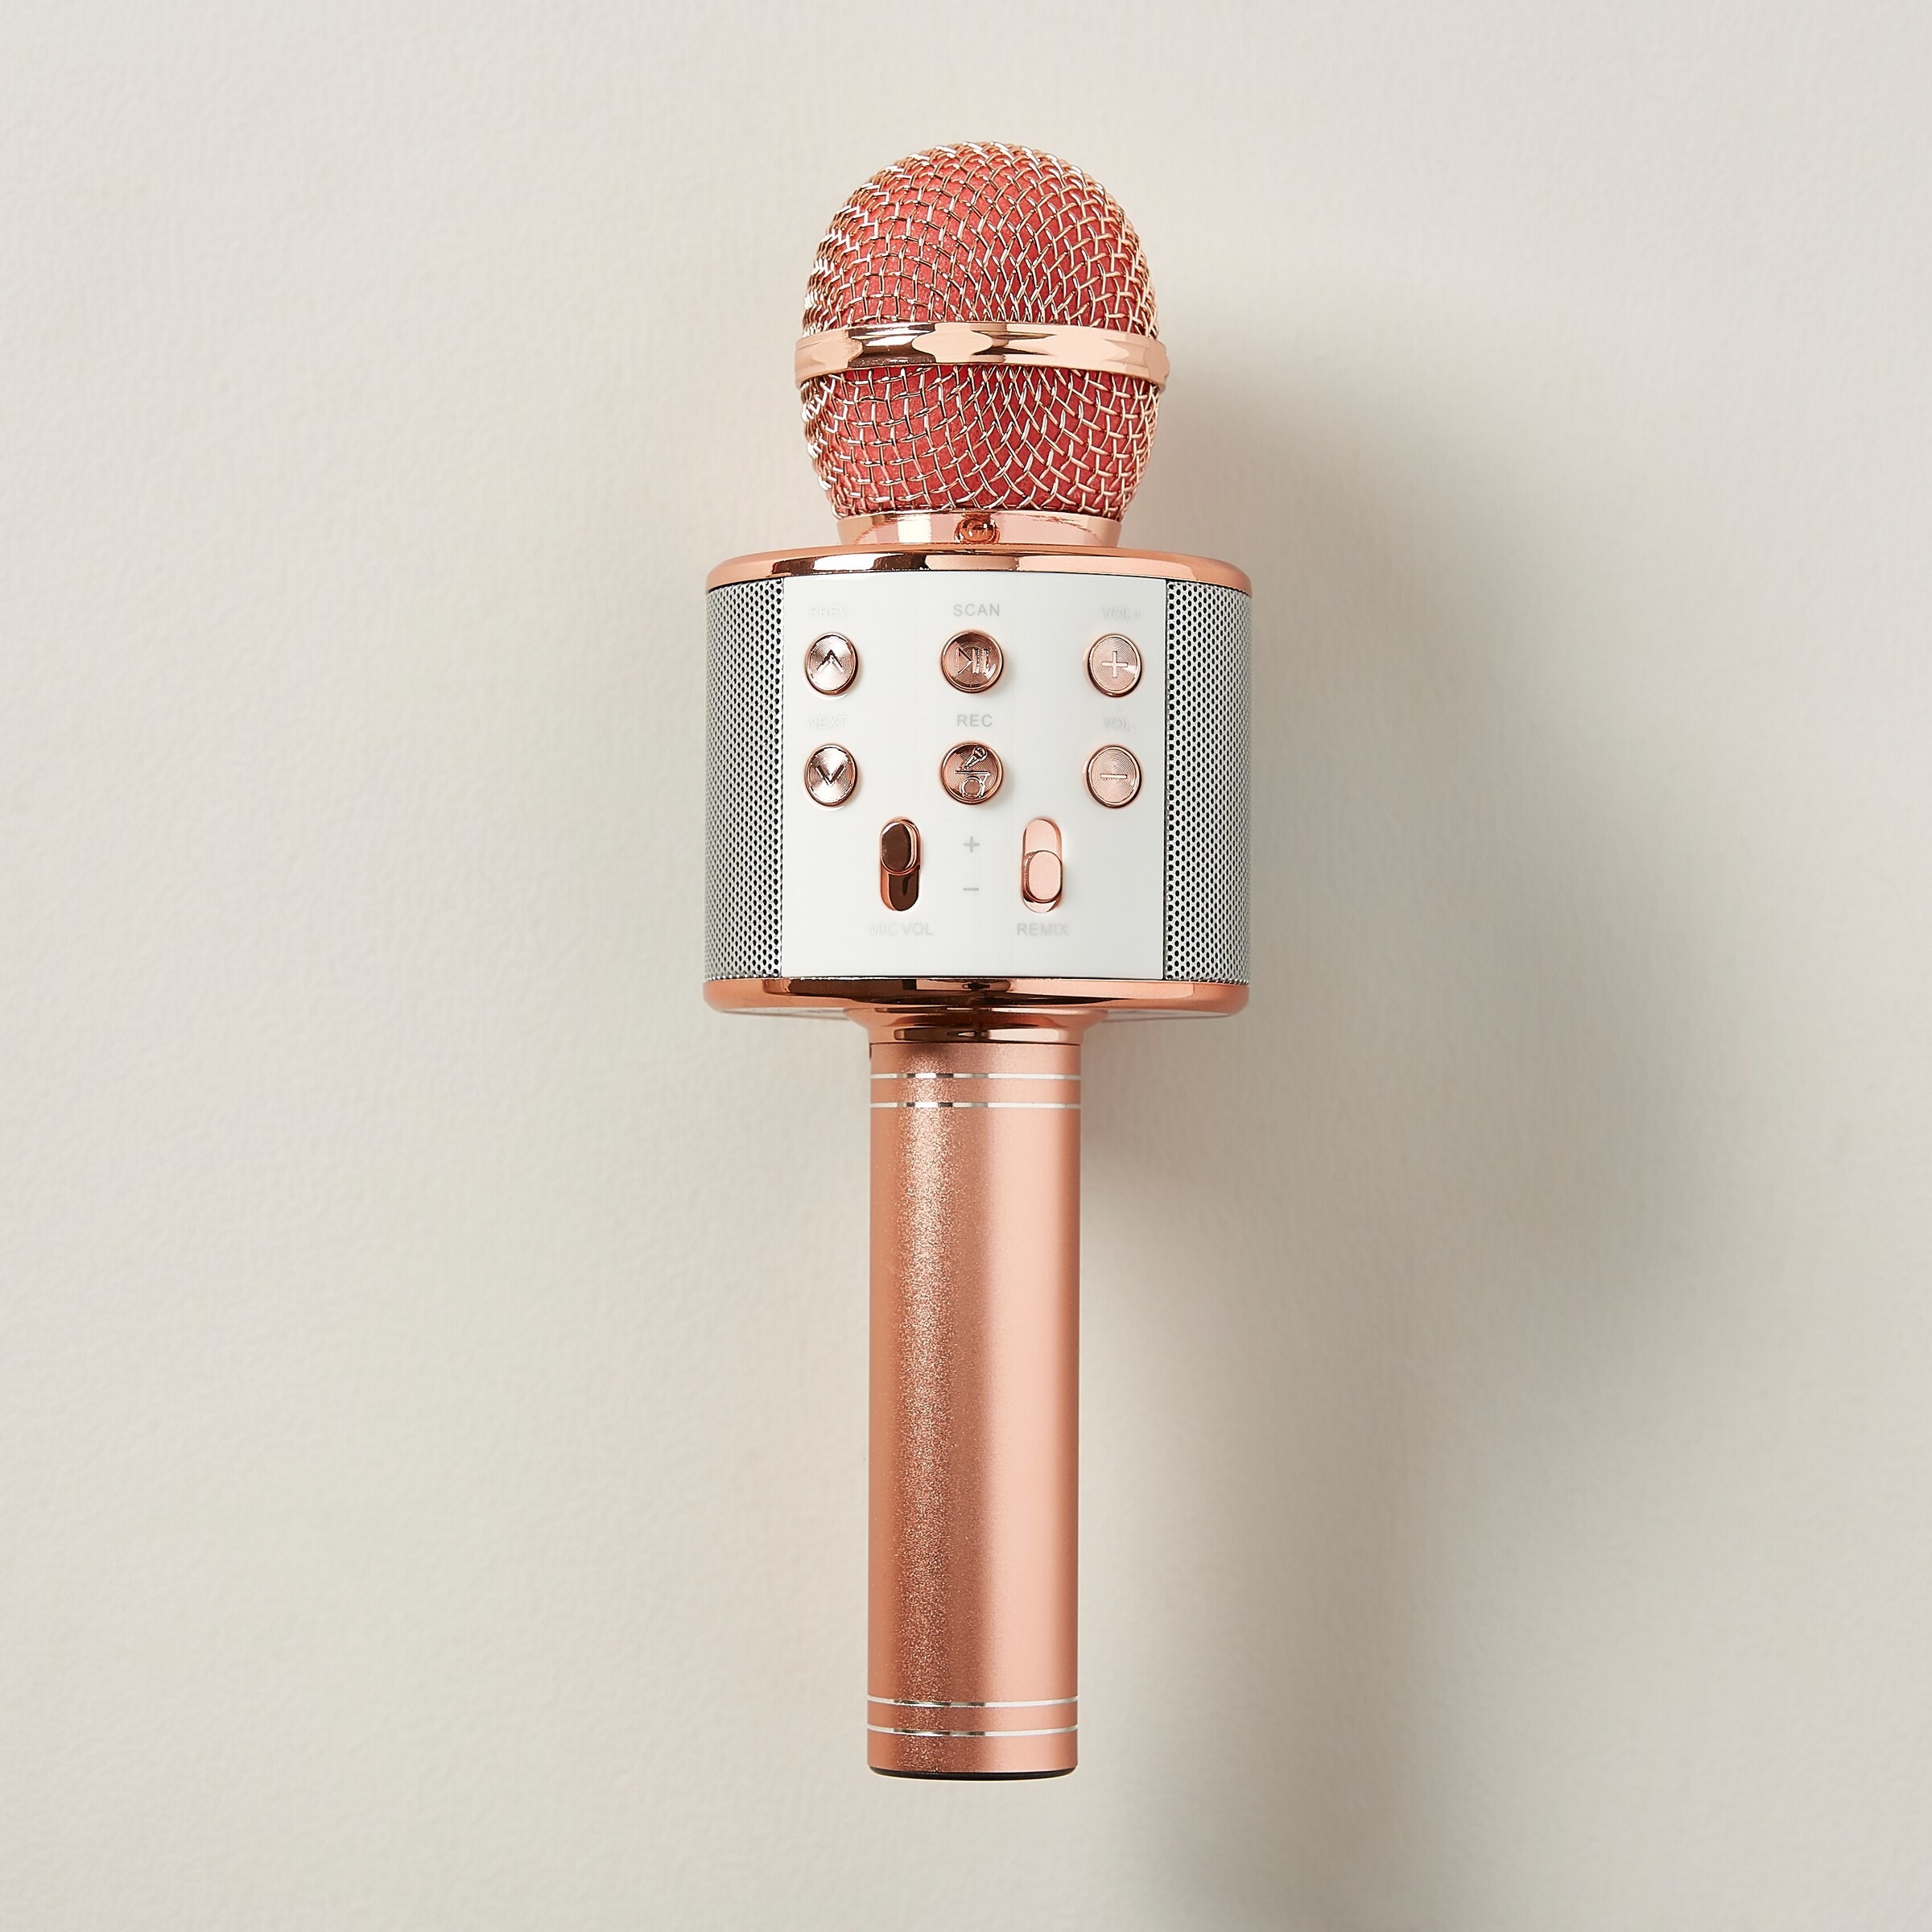 A cordless microphone on a plain background